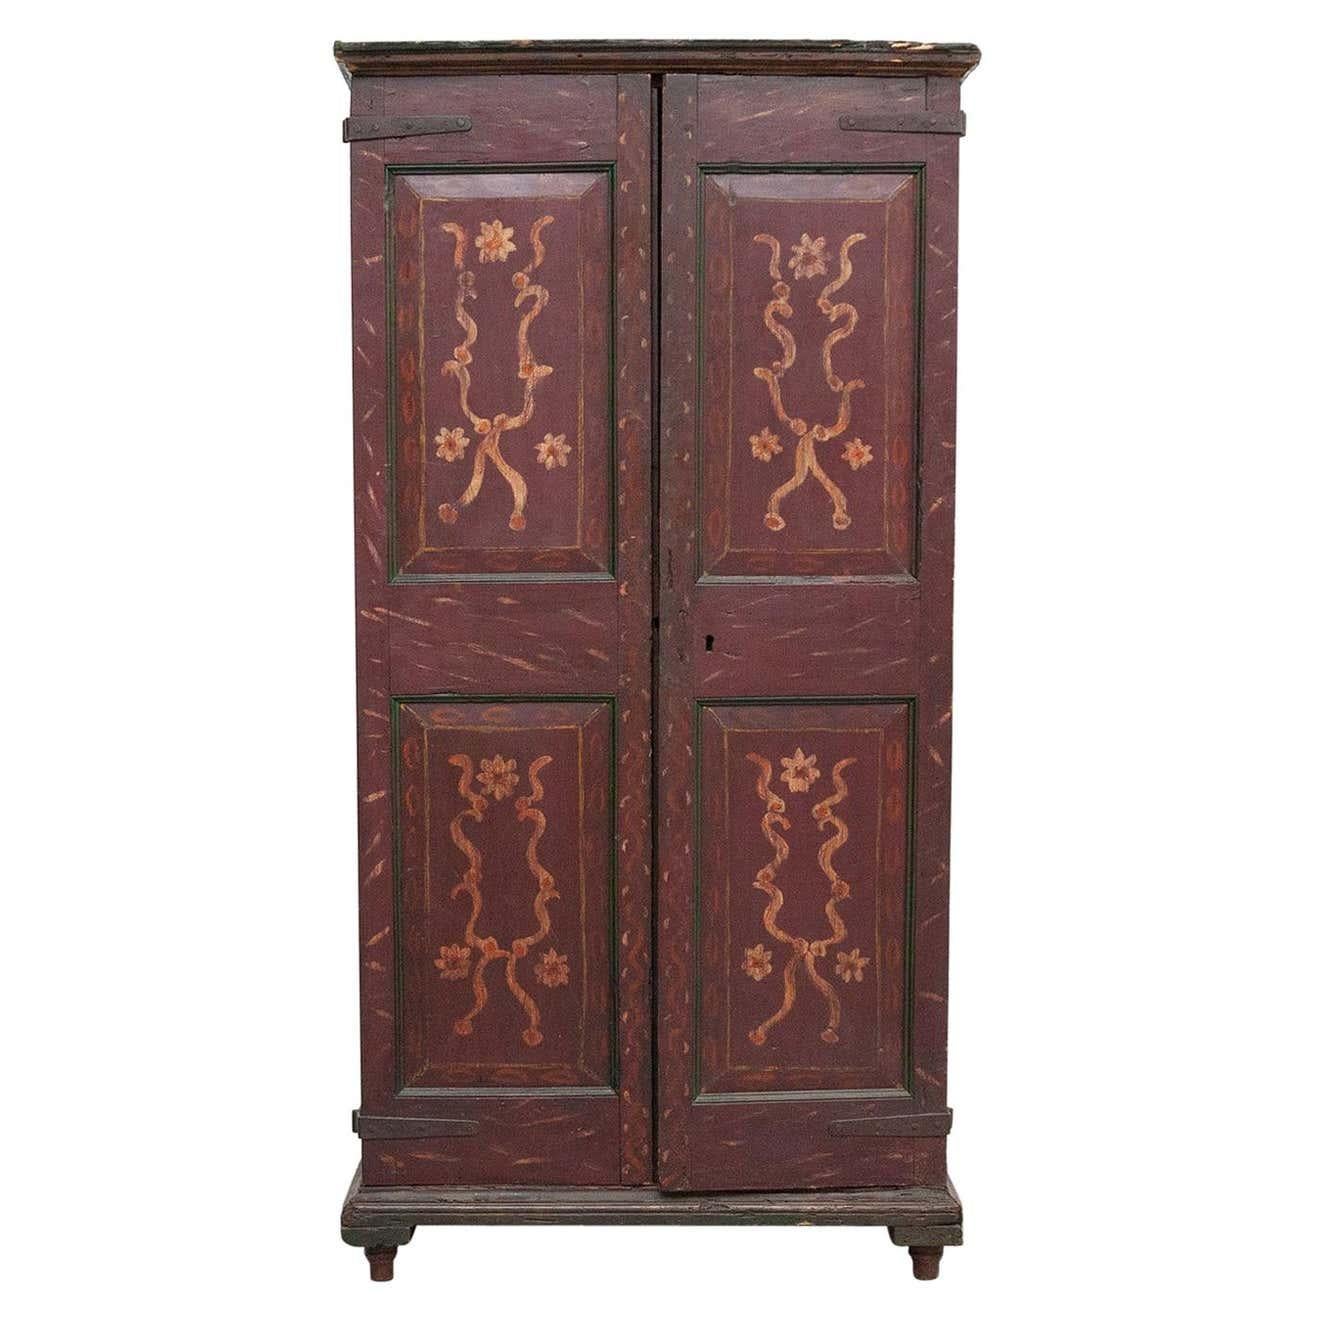 Polychrome wardrobe.
By unknown artisan from Spain, circa 1850

In original condition, with minor wear consistent with age and use, preserving a beautiful patina.

Material:
Wood

Dimensions:
D cm x W cm x H cm.